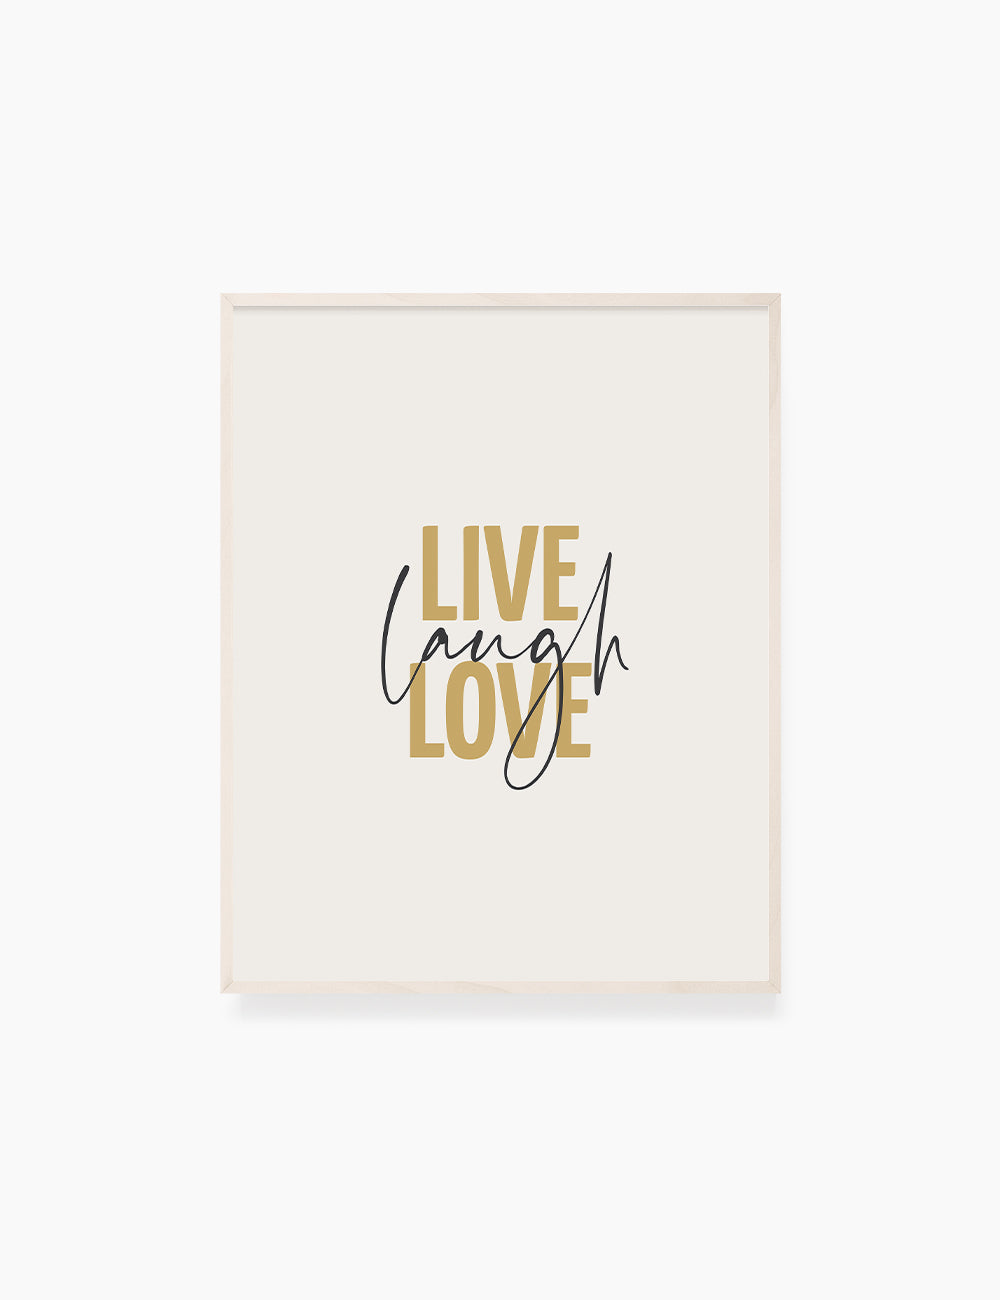 Art PAPER Inspirational – Printable MOON Design quote. LOVE. LIVE. Gold. Yellow LAUGH. & Art Wall Beige. Quote.